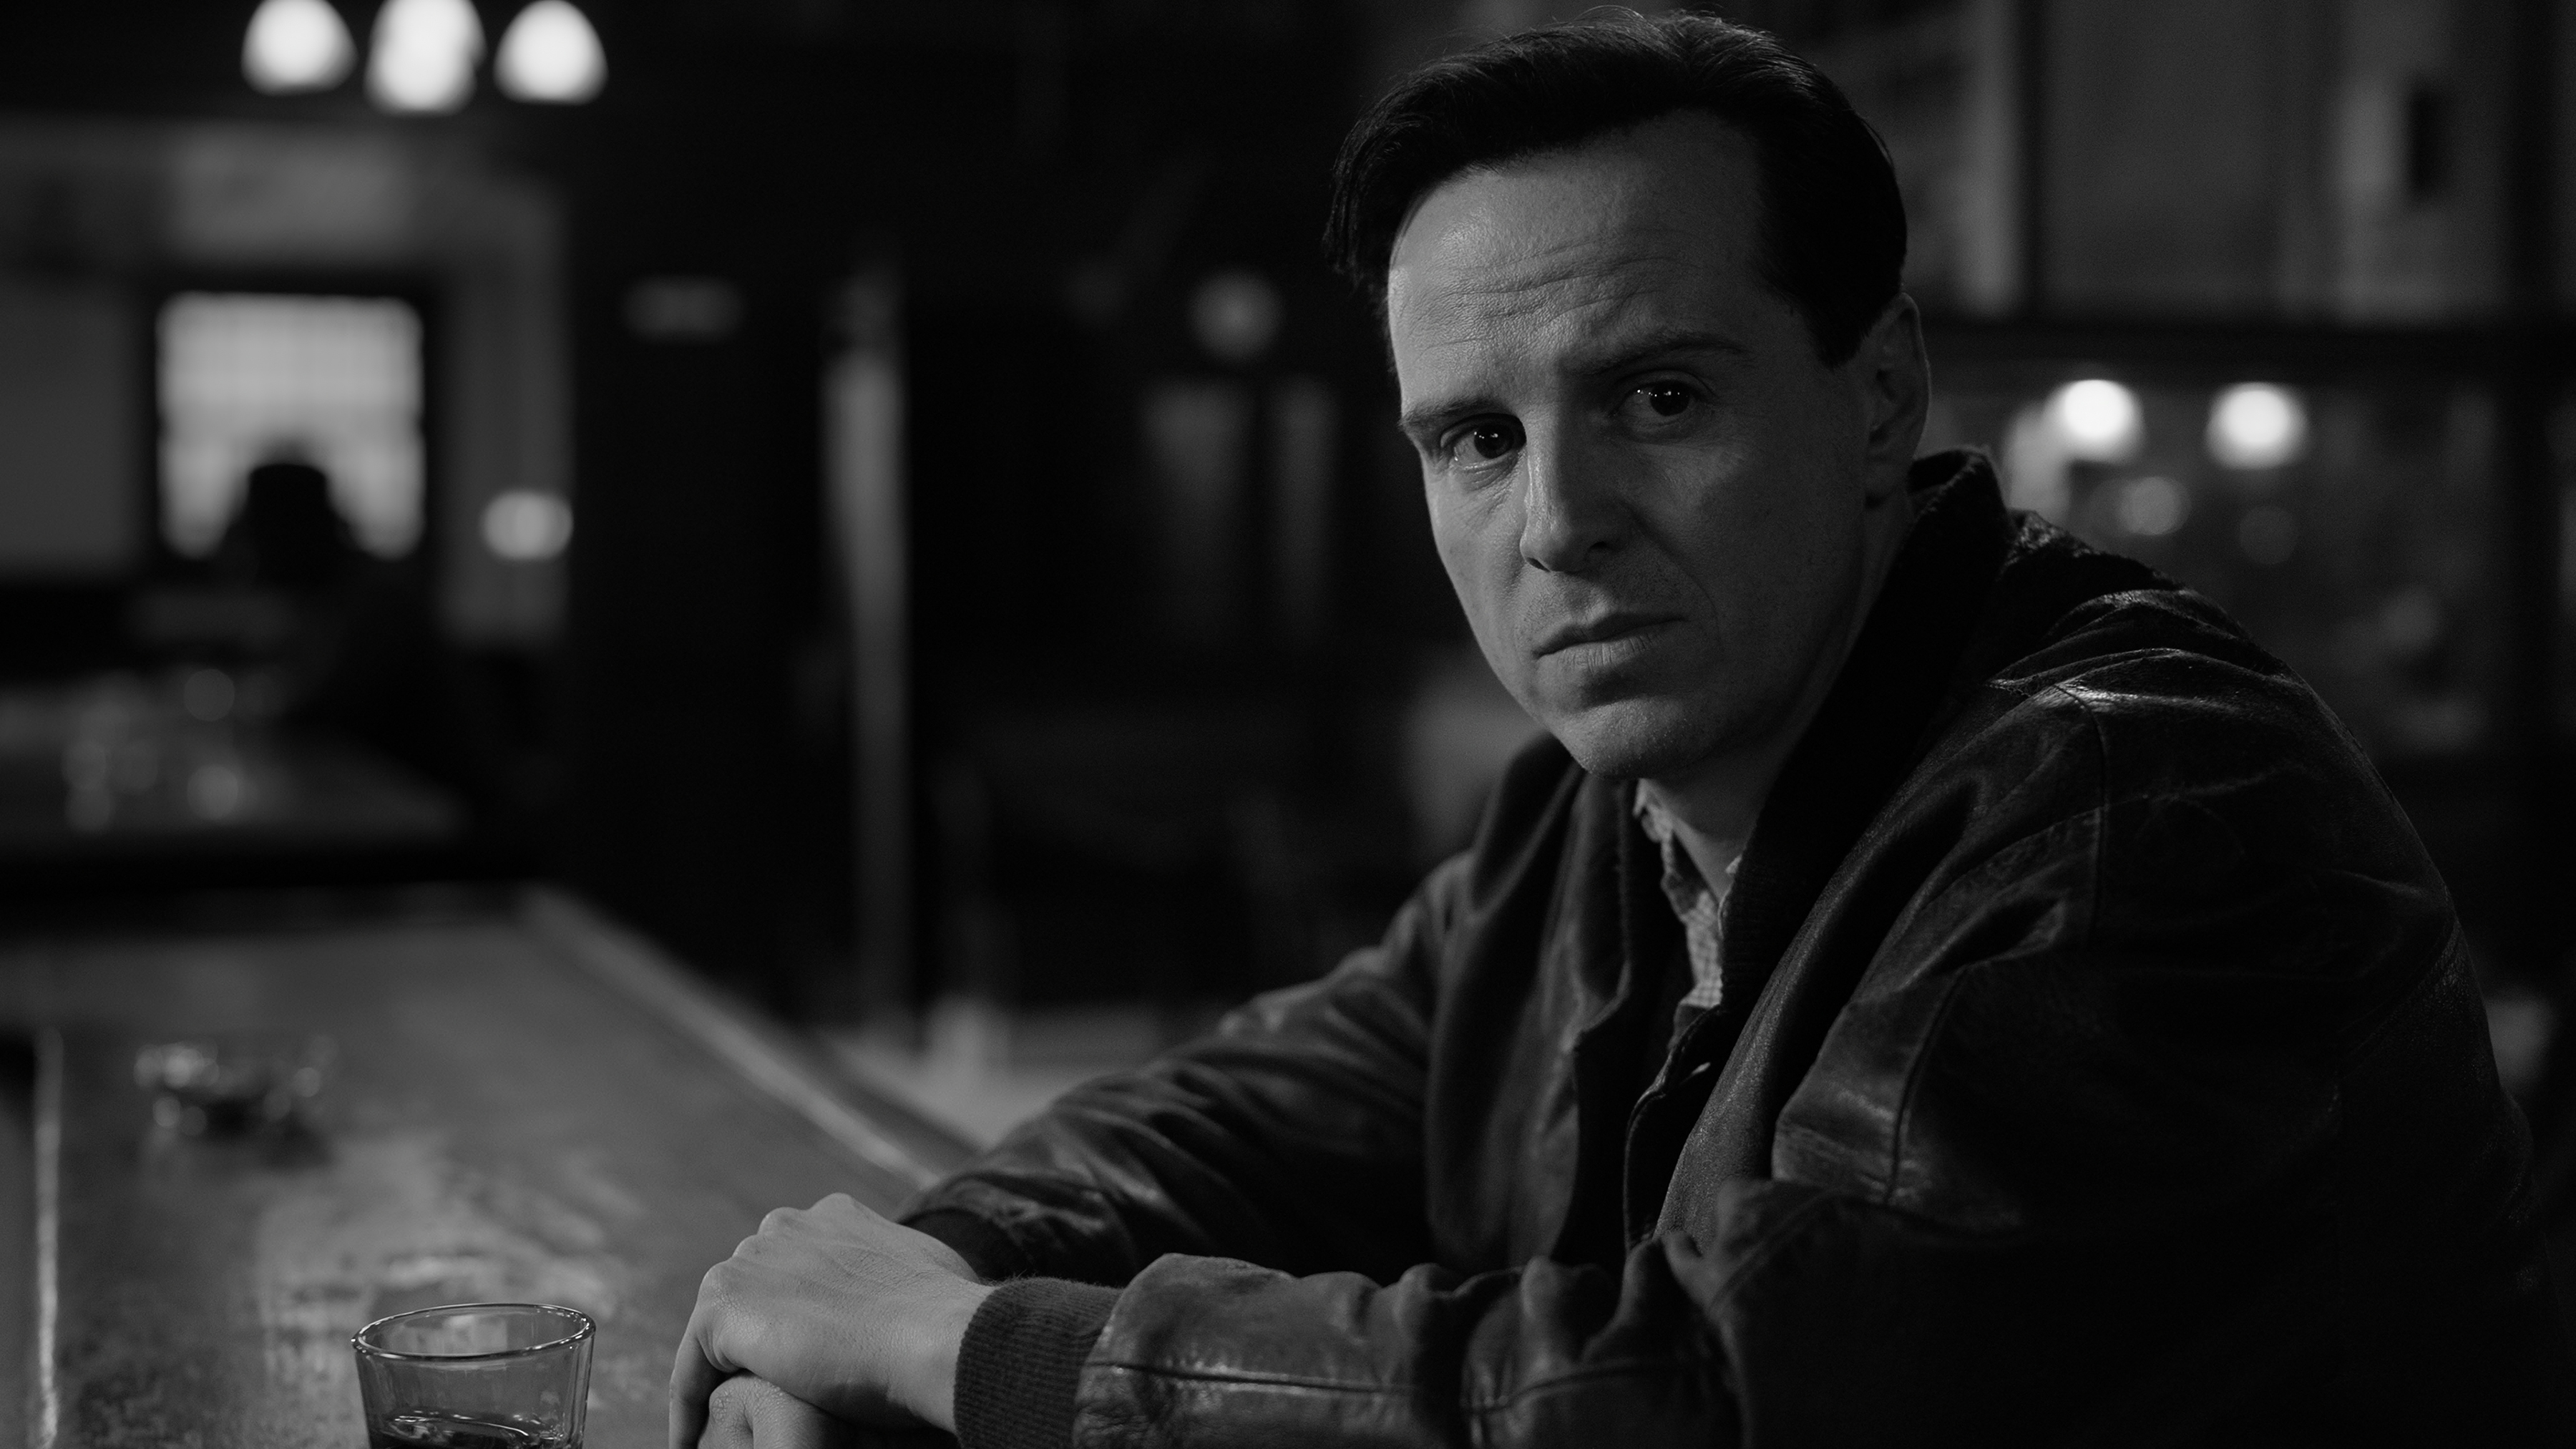 Andrew Scott in Ripley sitting at a bar